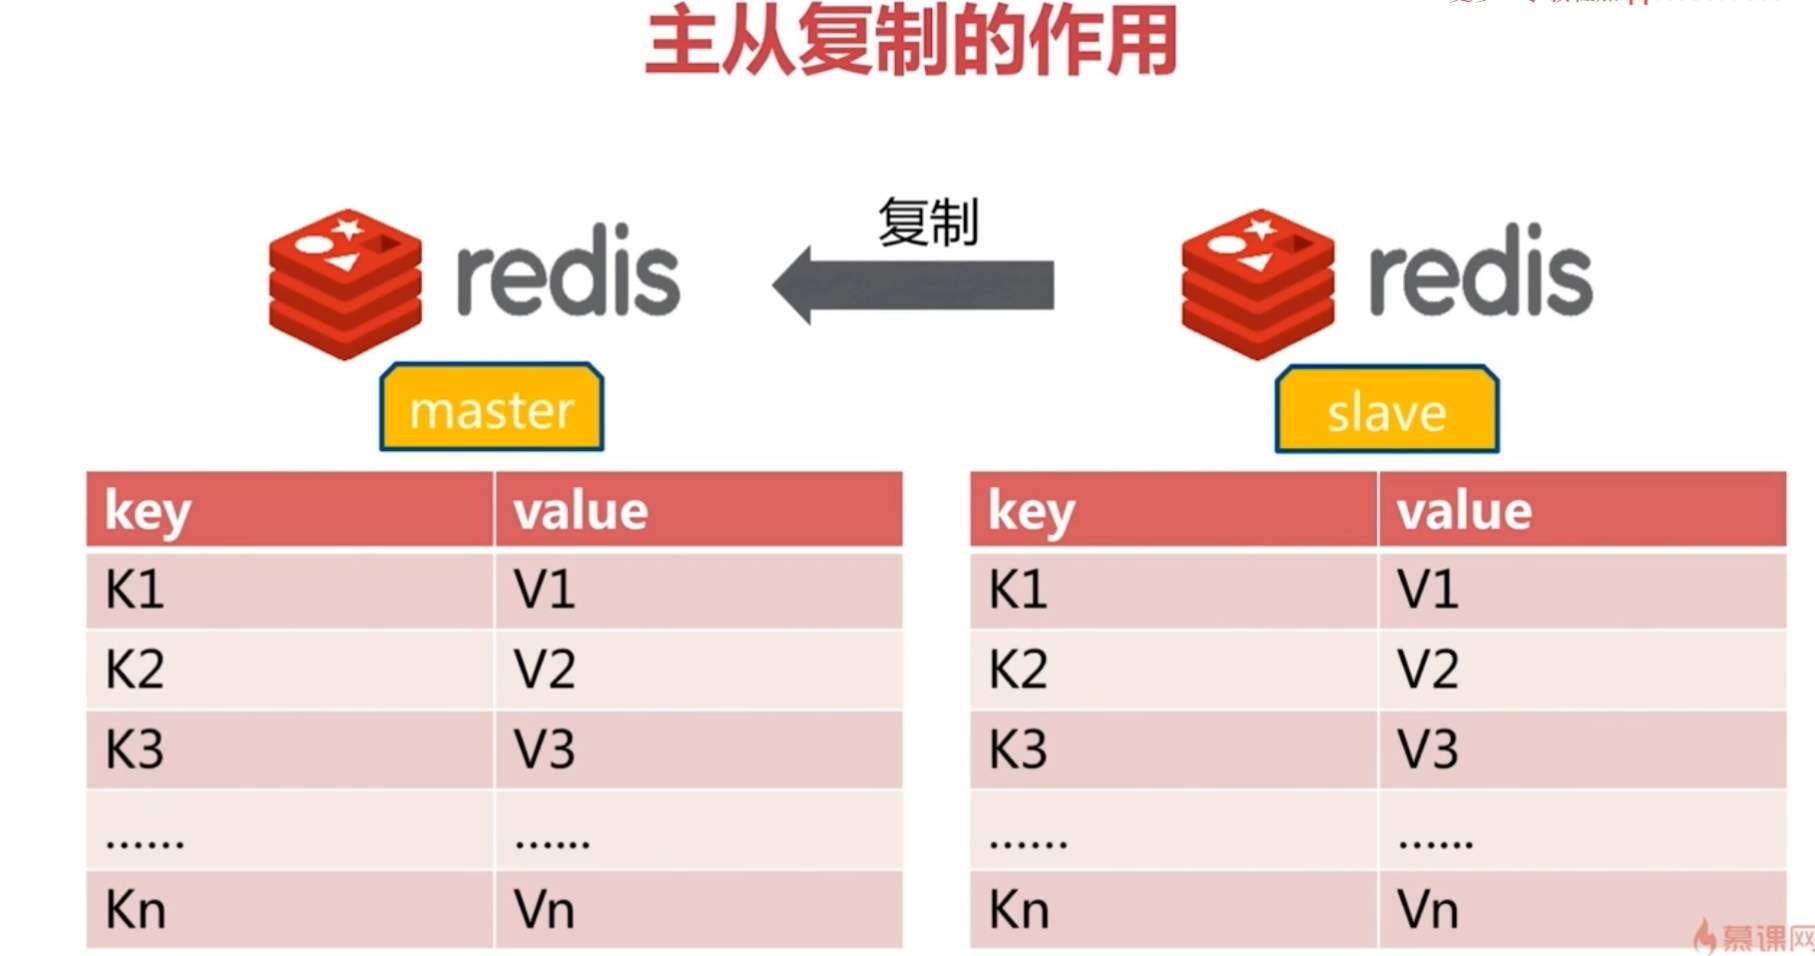 redis-<span style='color:red;'>4</span> <span style='color:red;'>集</span><span style='color:red;'>群</span>